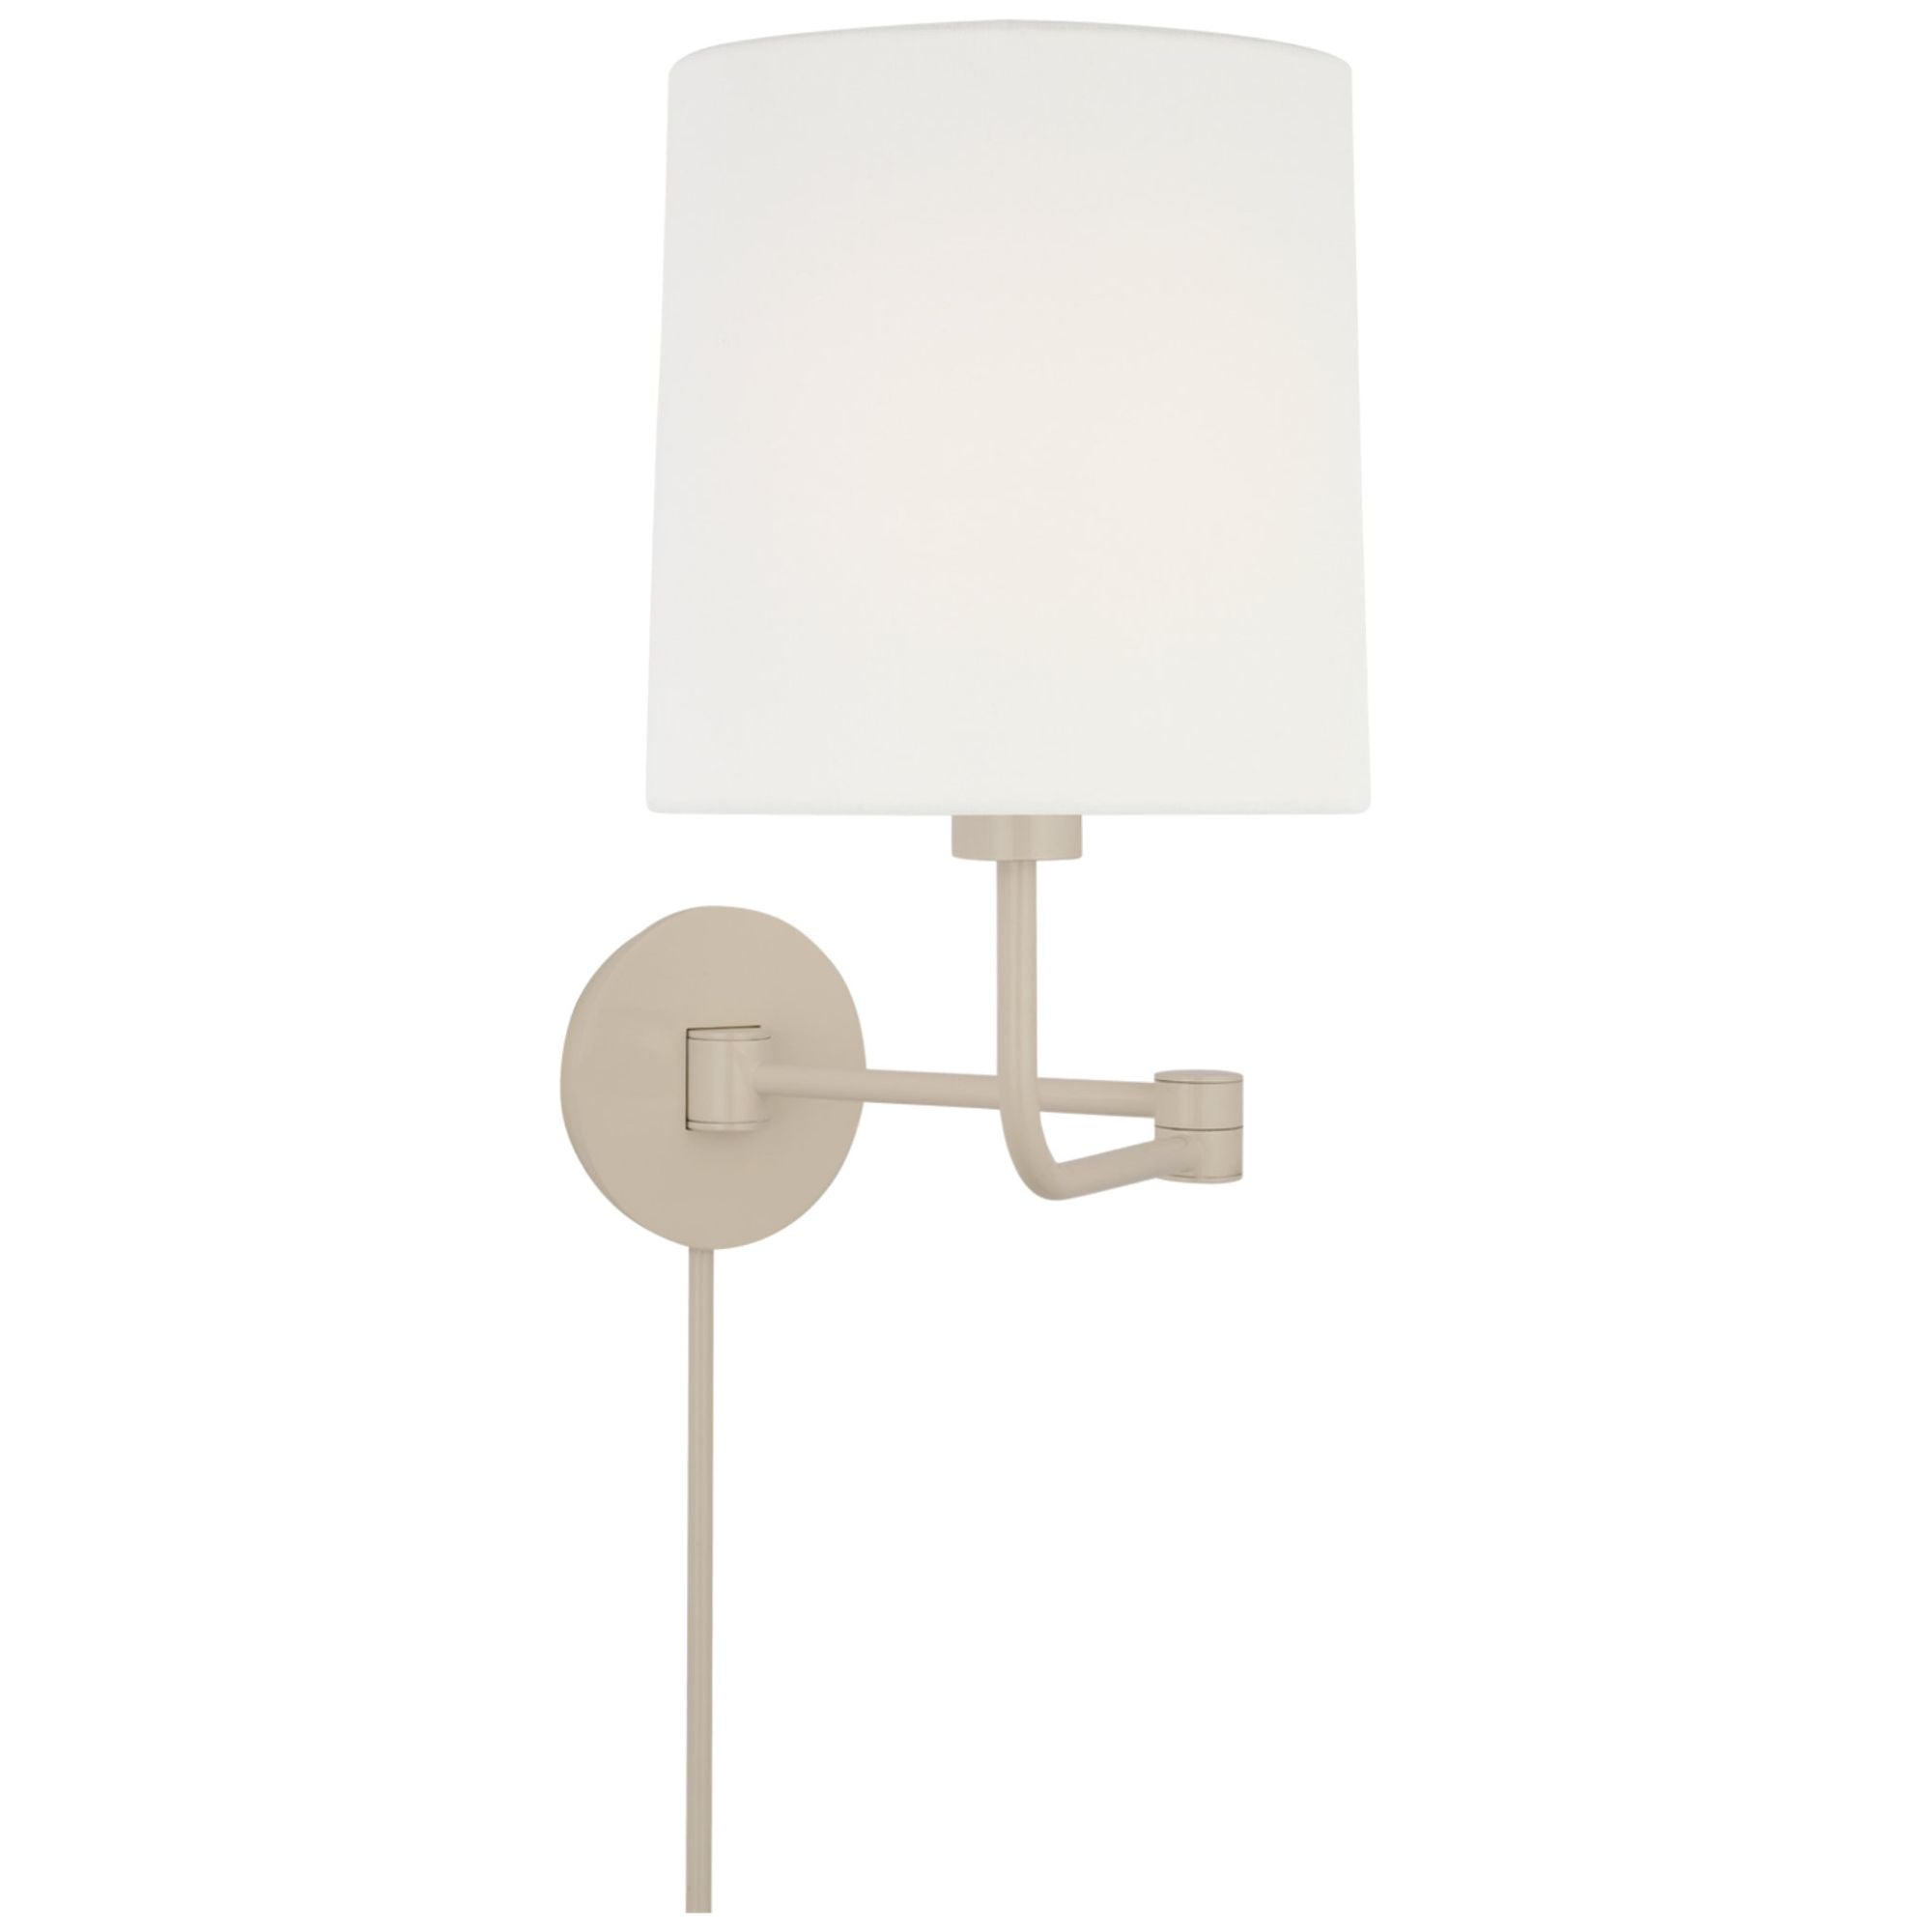 Barbara Barry Go Lightly Swing Arm Wall Light in China White with Linen Shade